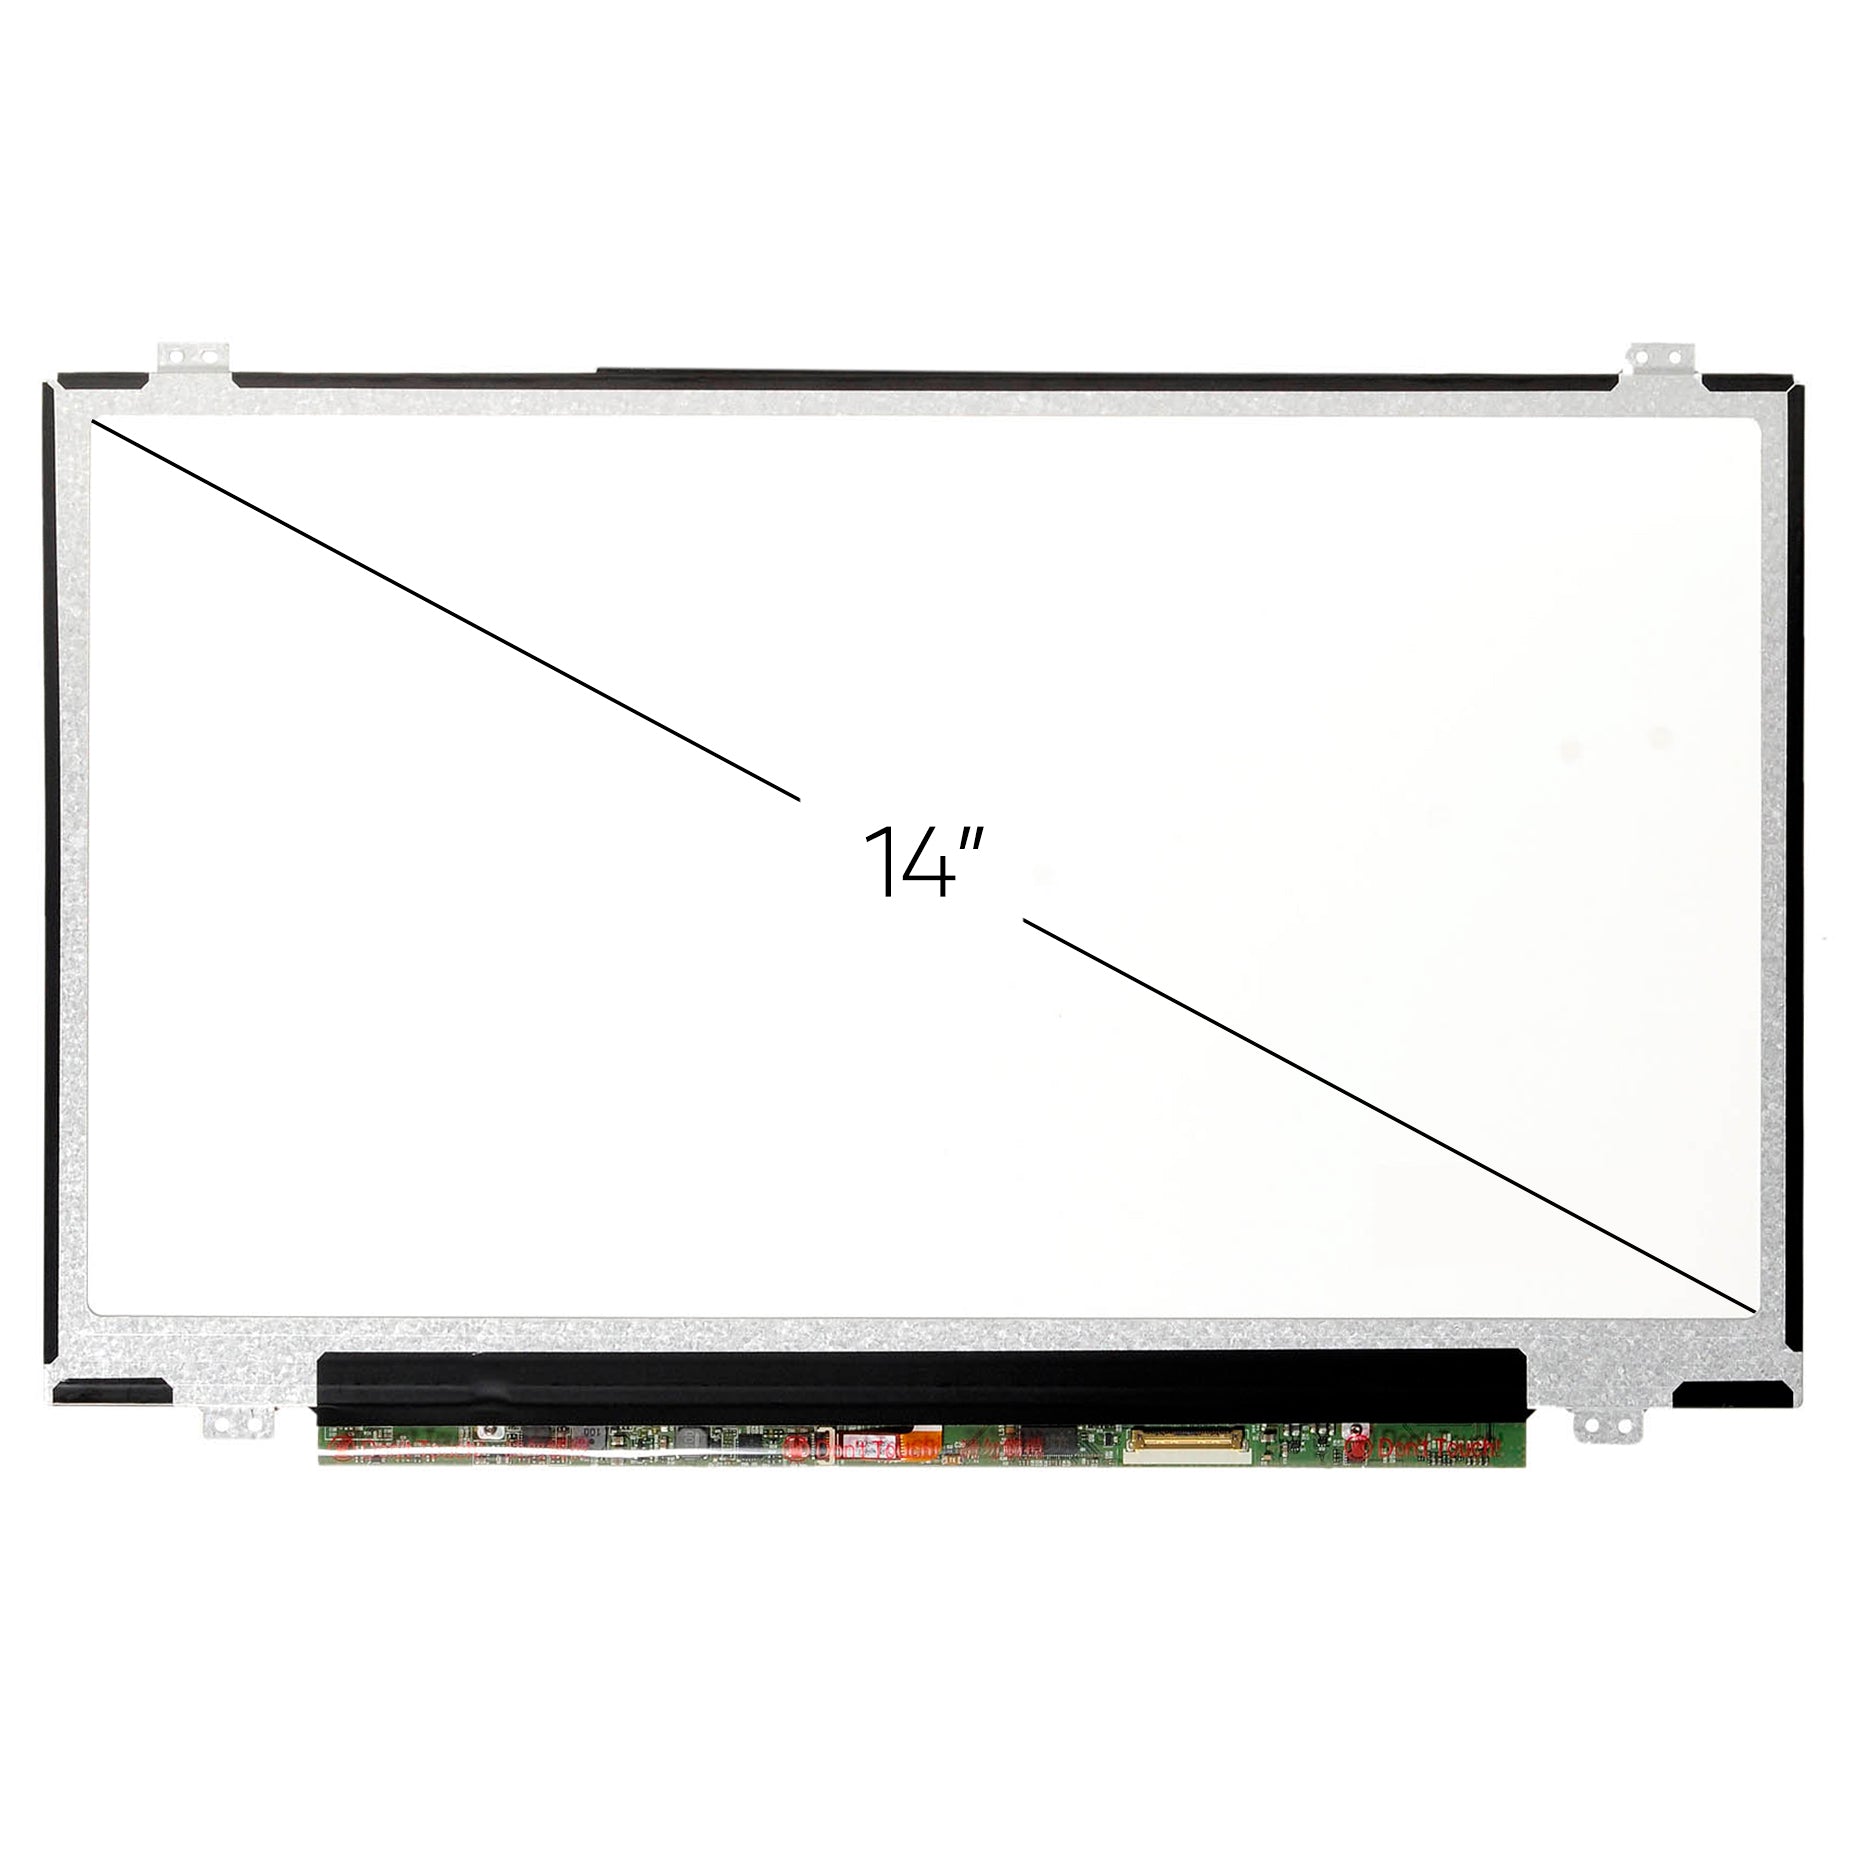 Screen Replacement for Lenovo FRU 01EN223 FHD 1920x1080 IPS Matte LCD LED Display